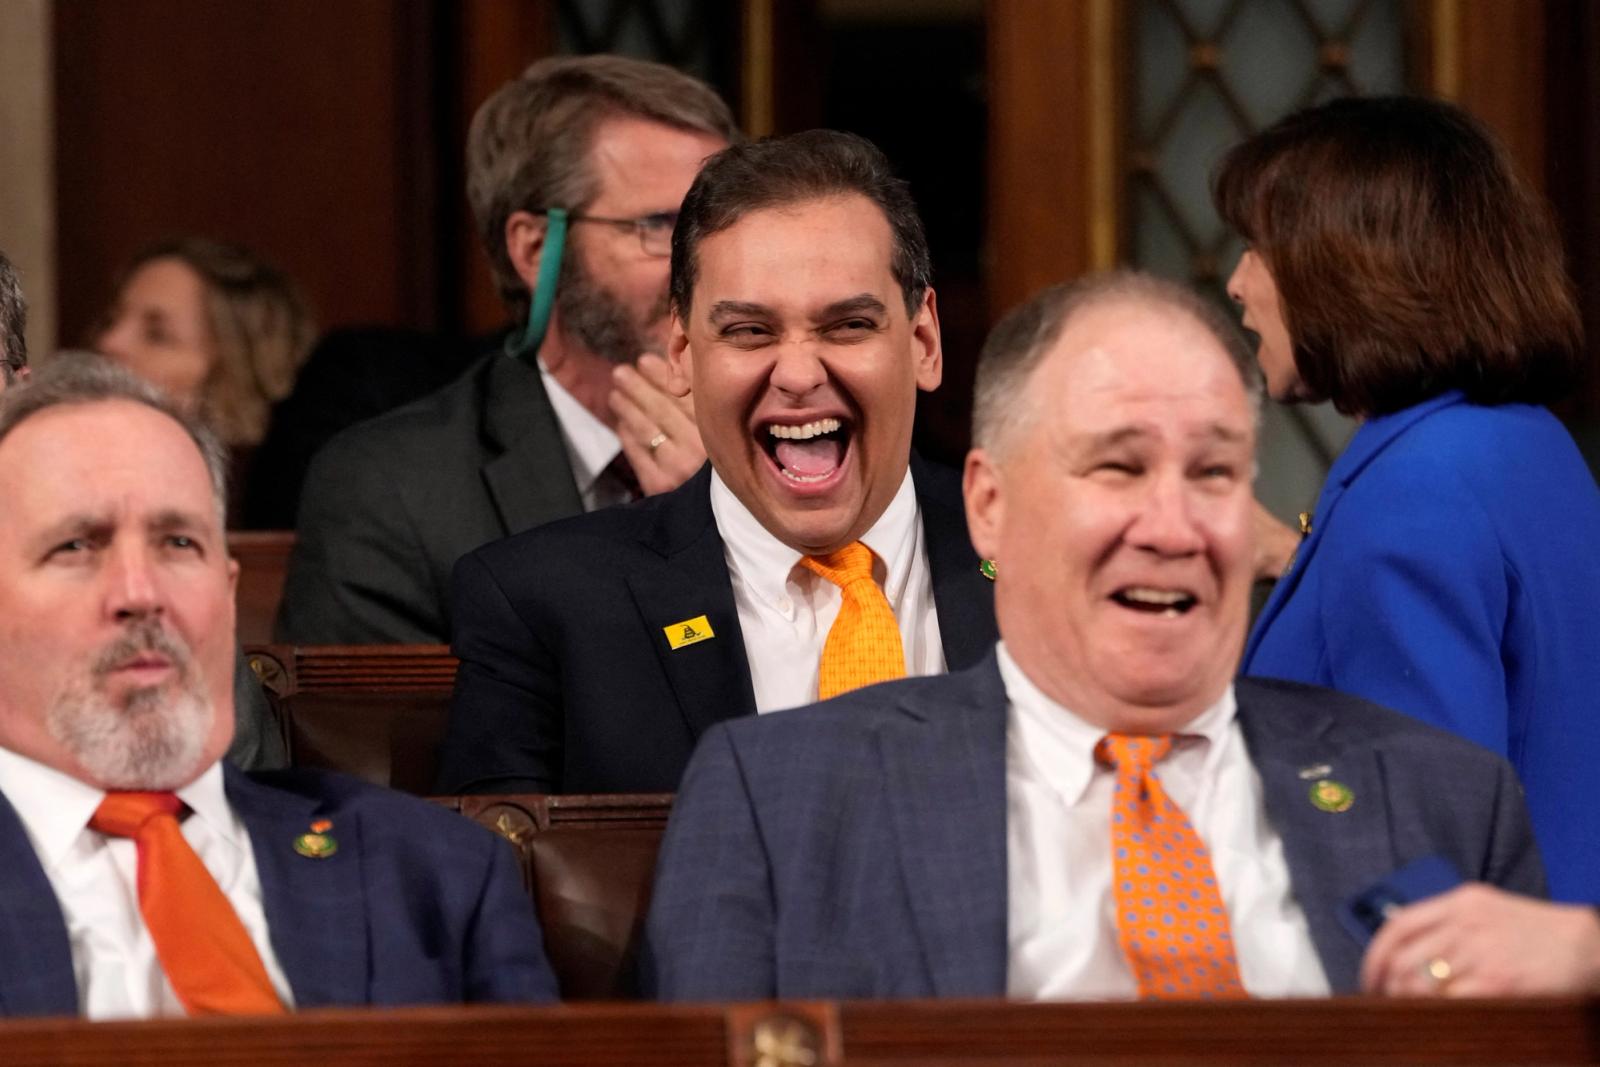 Rep. George Santos, R-N.Y., laughs before President Joe Biden delivers the State of the Union address to a joint session of Congress at the U.S. Capitol, Tuesday, Feb. 7, 2023, in Washington.  